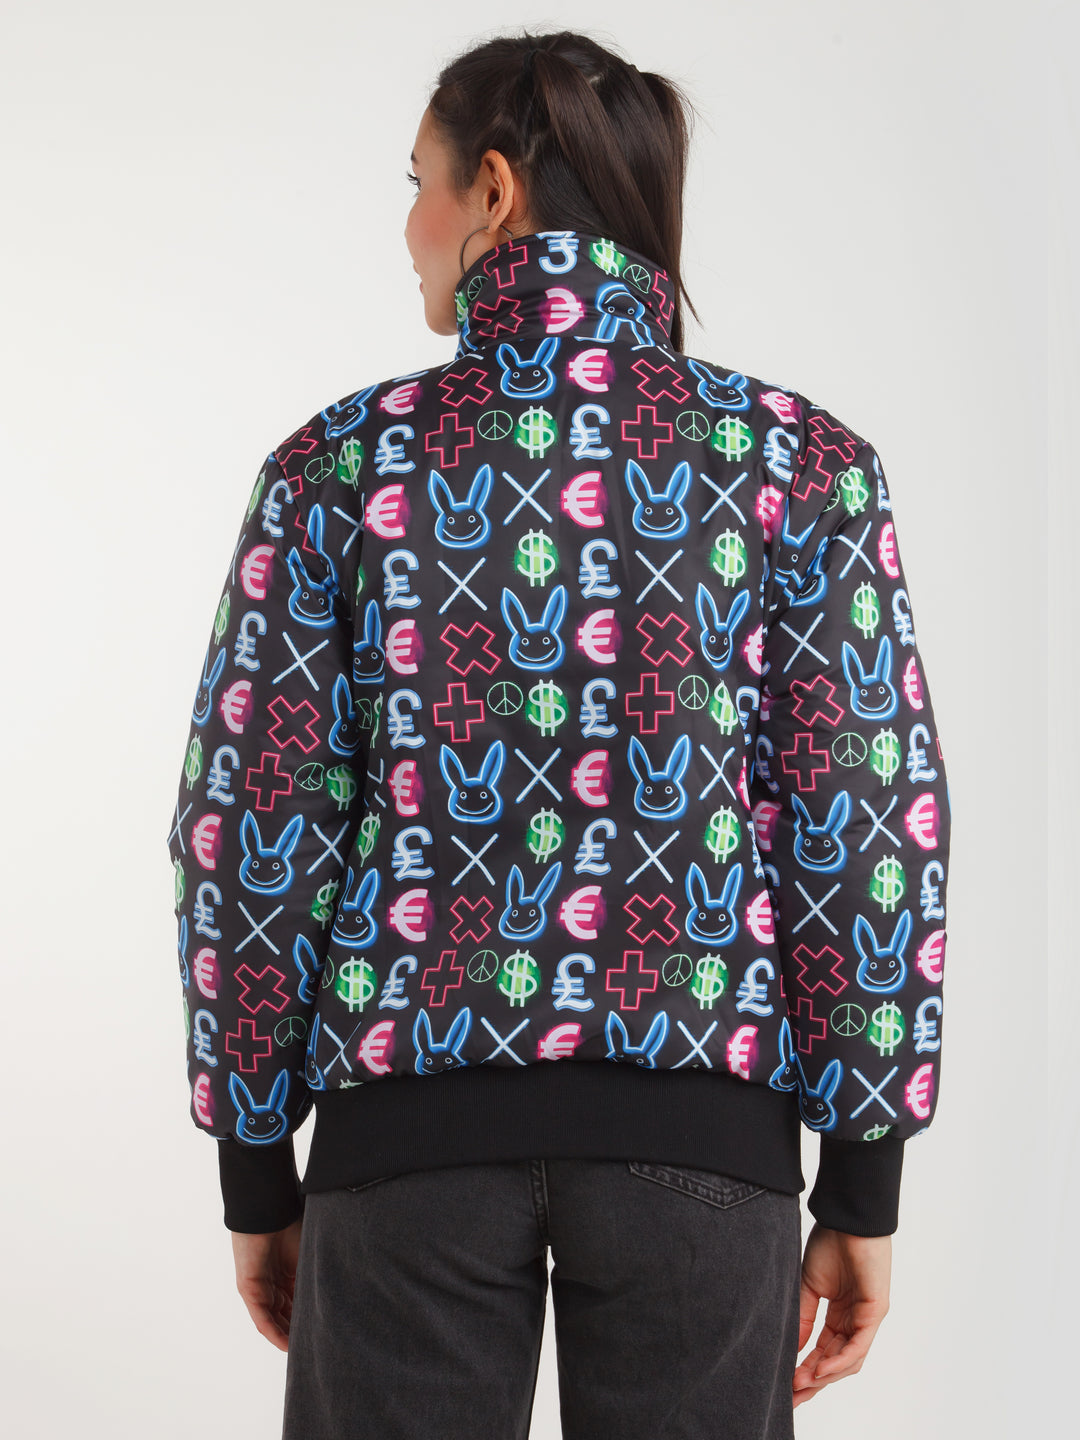 Black Graphic Print Jacket For Women